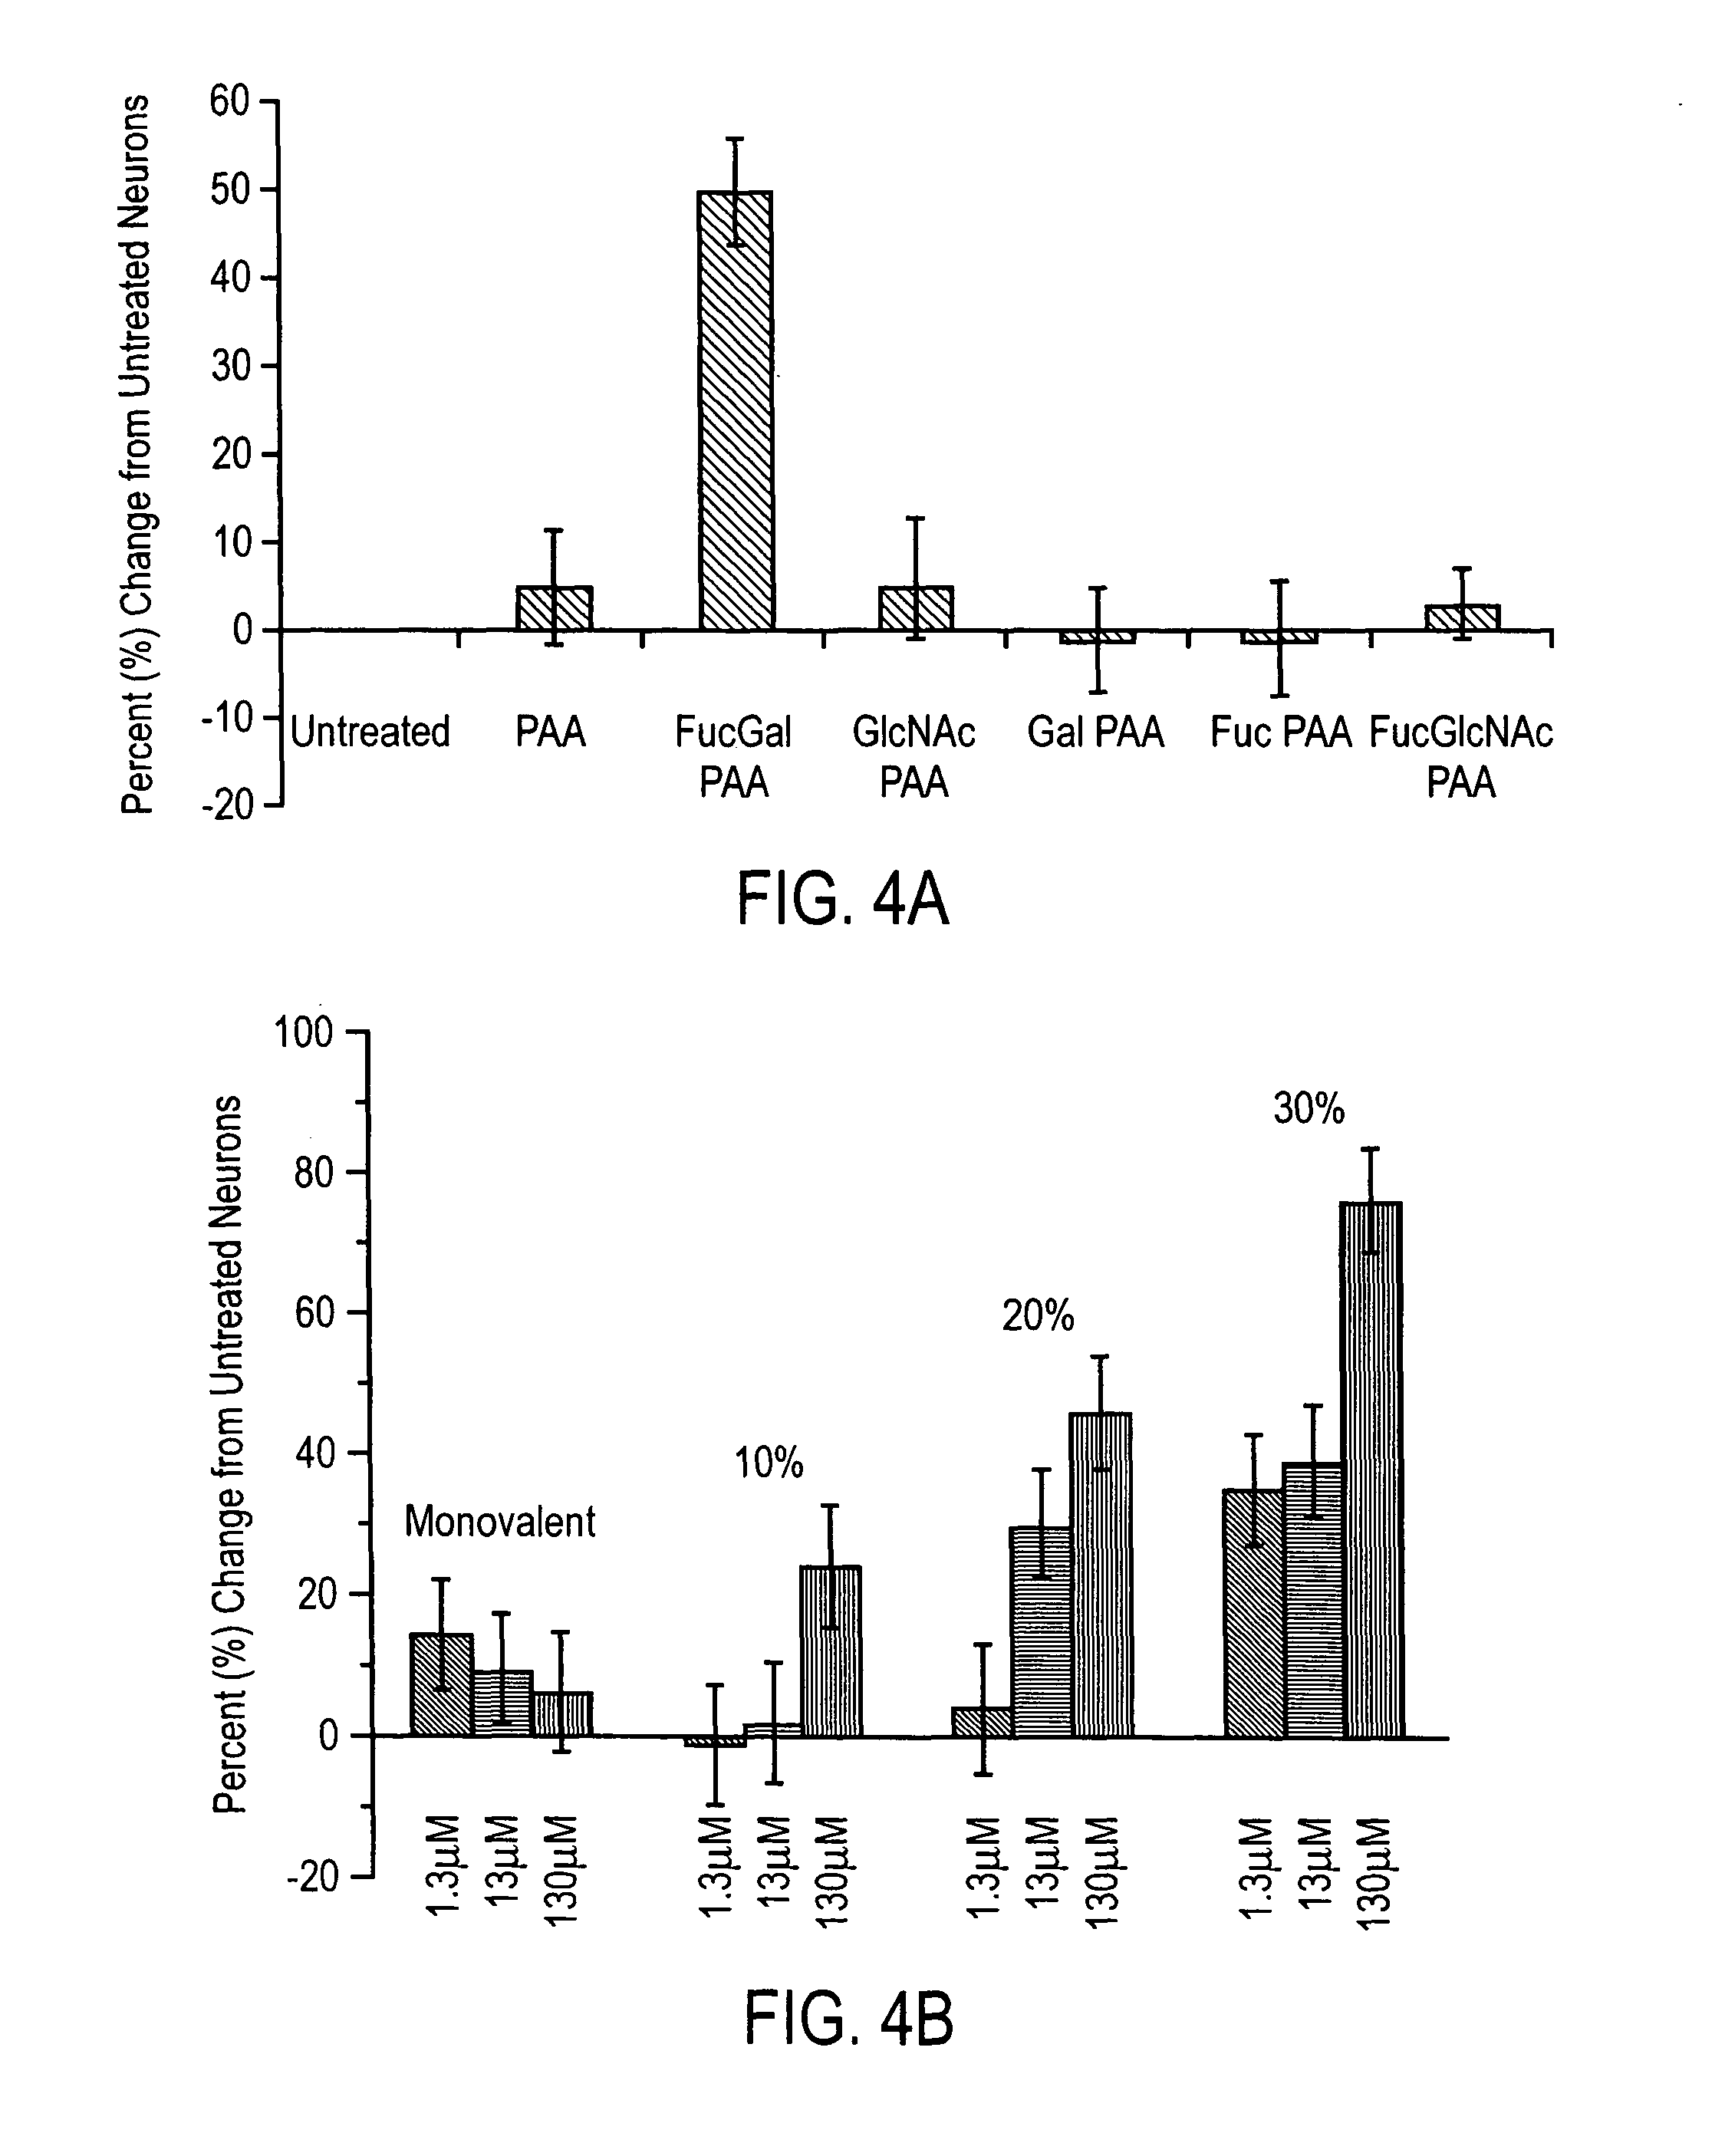 Methods of inducing neuronal growth by a Fucose-α(1-2) galactose (fuc-α(1-2) gal) moiety and a lectin